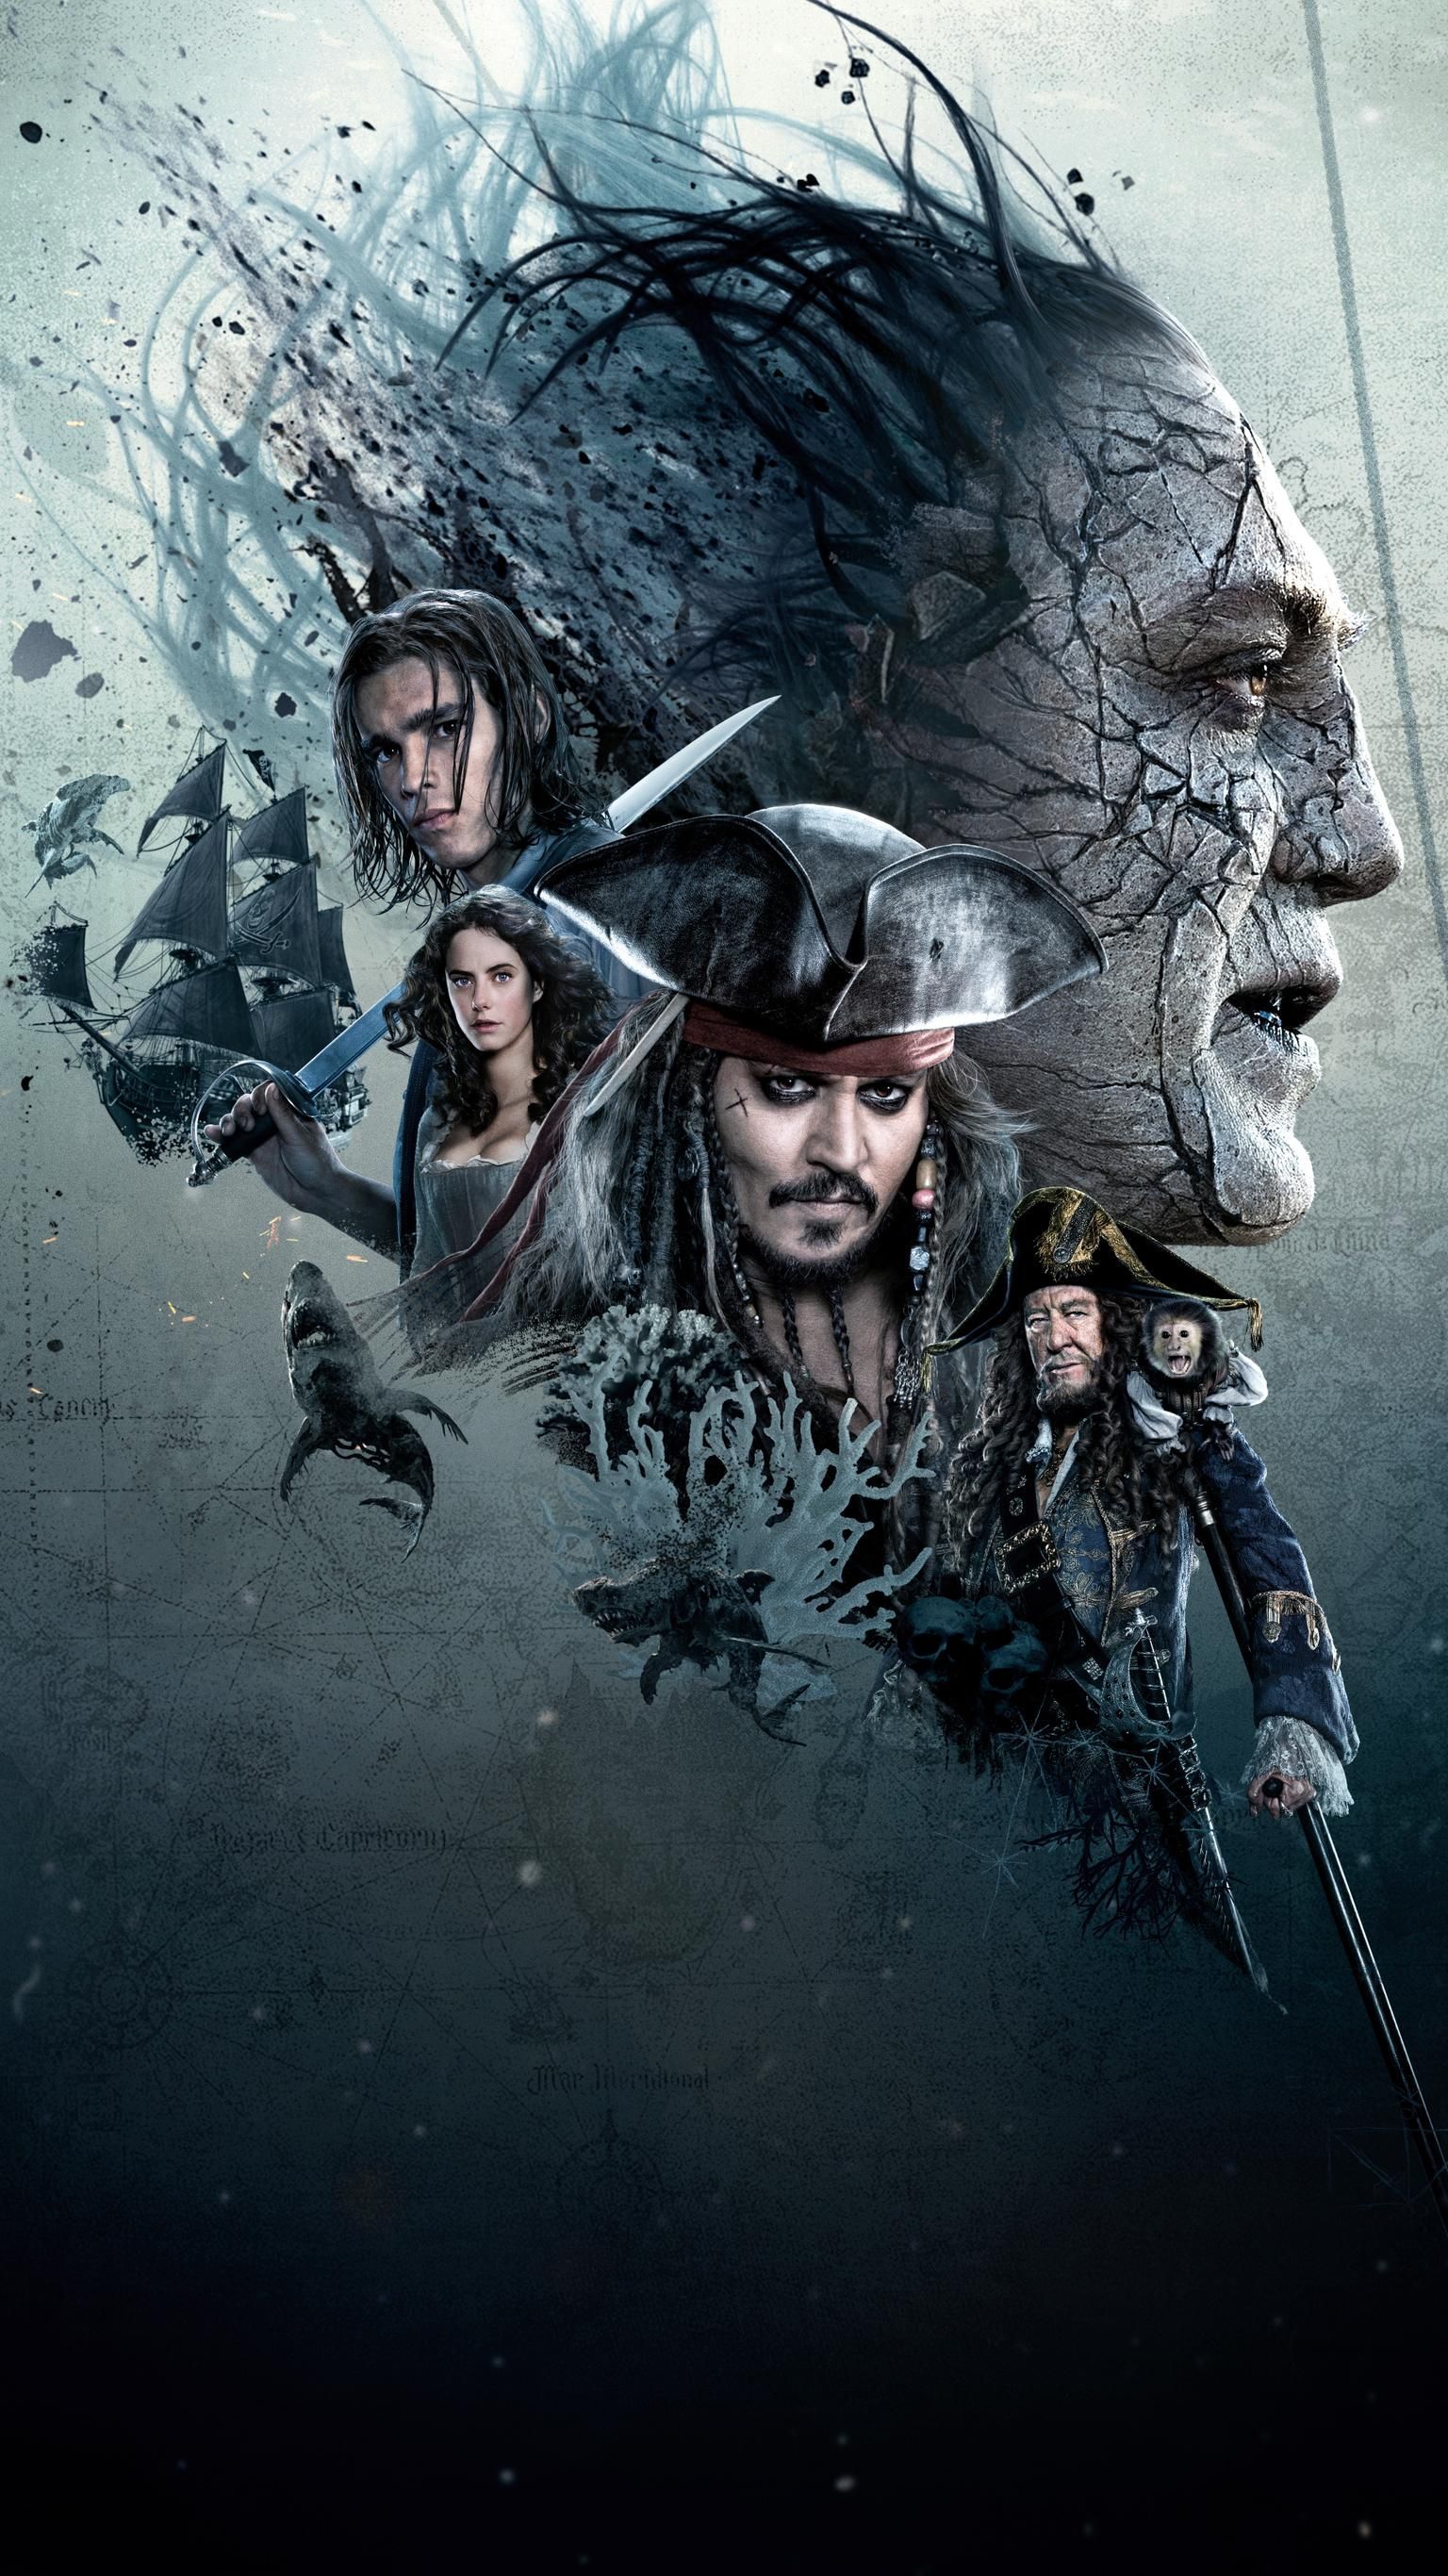 Pirates Of The Caribbean Phone Wallpapers